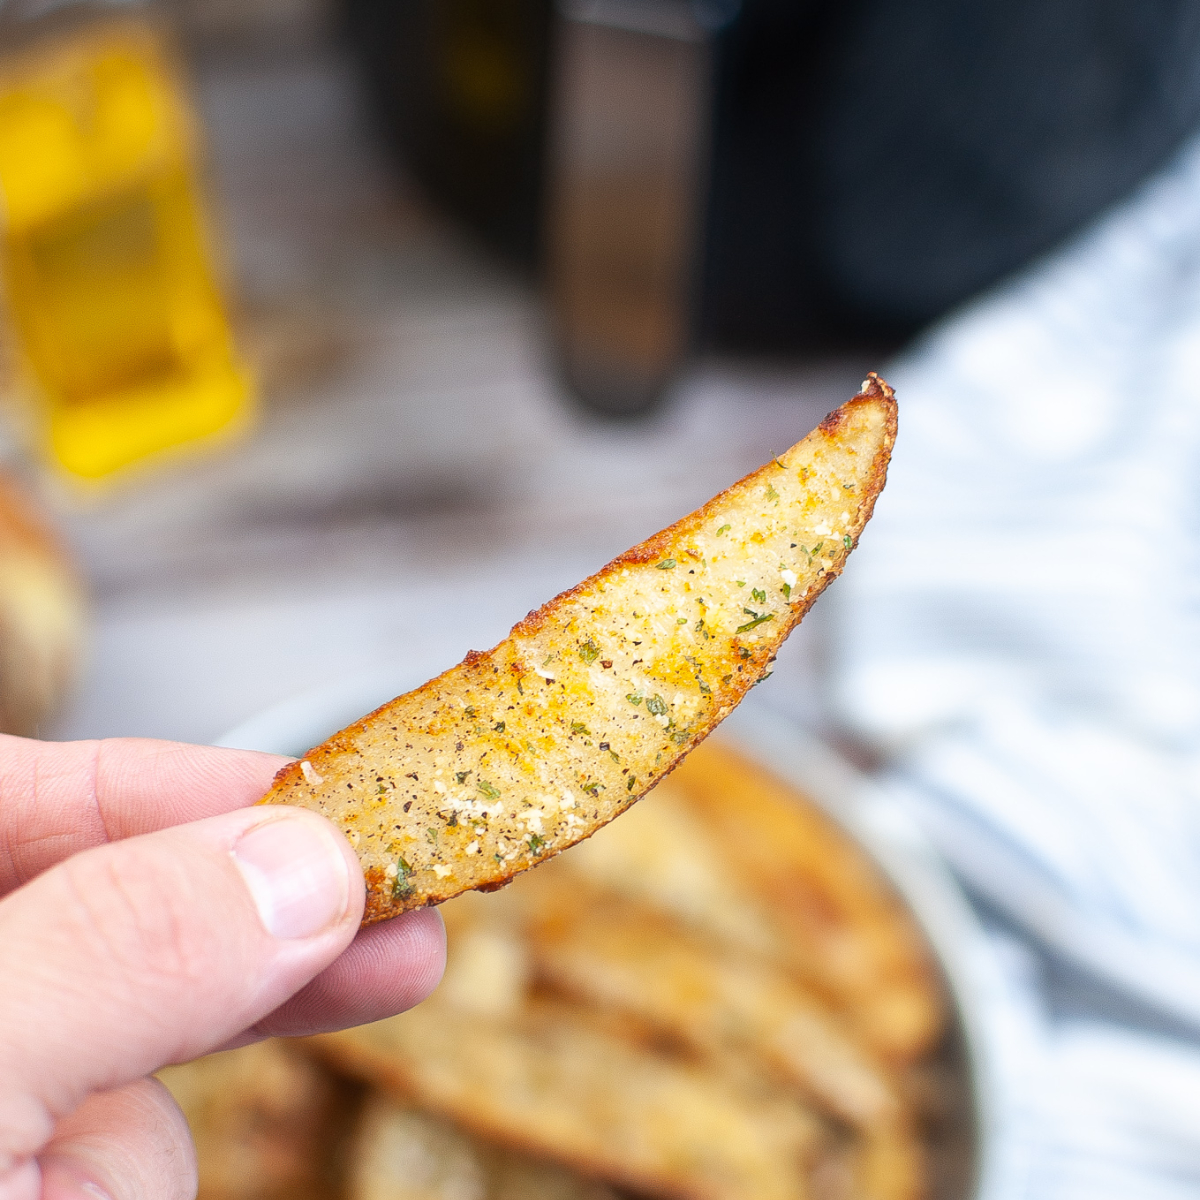 Crispy Air Fryer Potato Wedges - Hungry Foodie